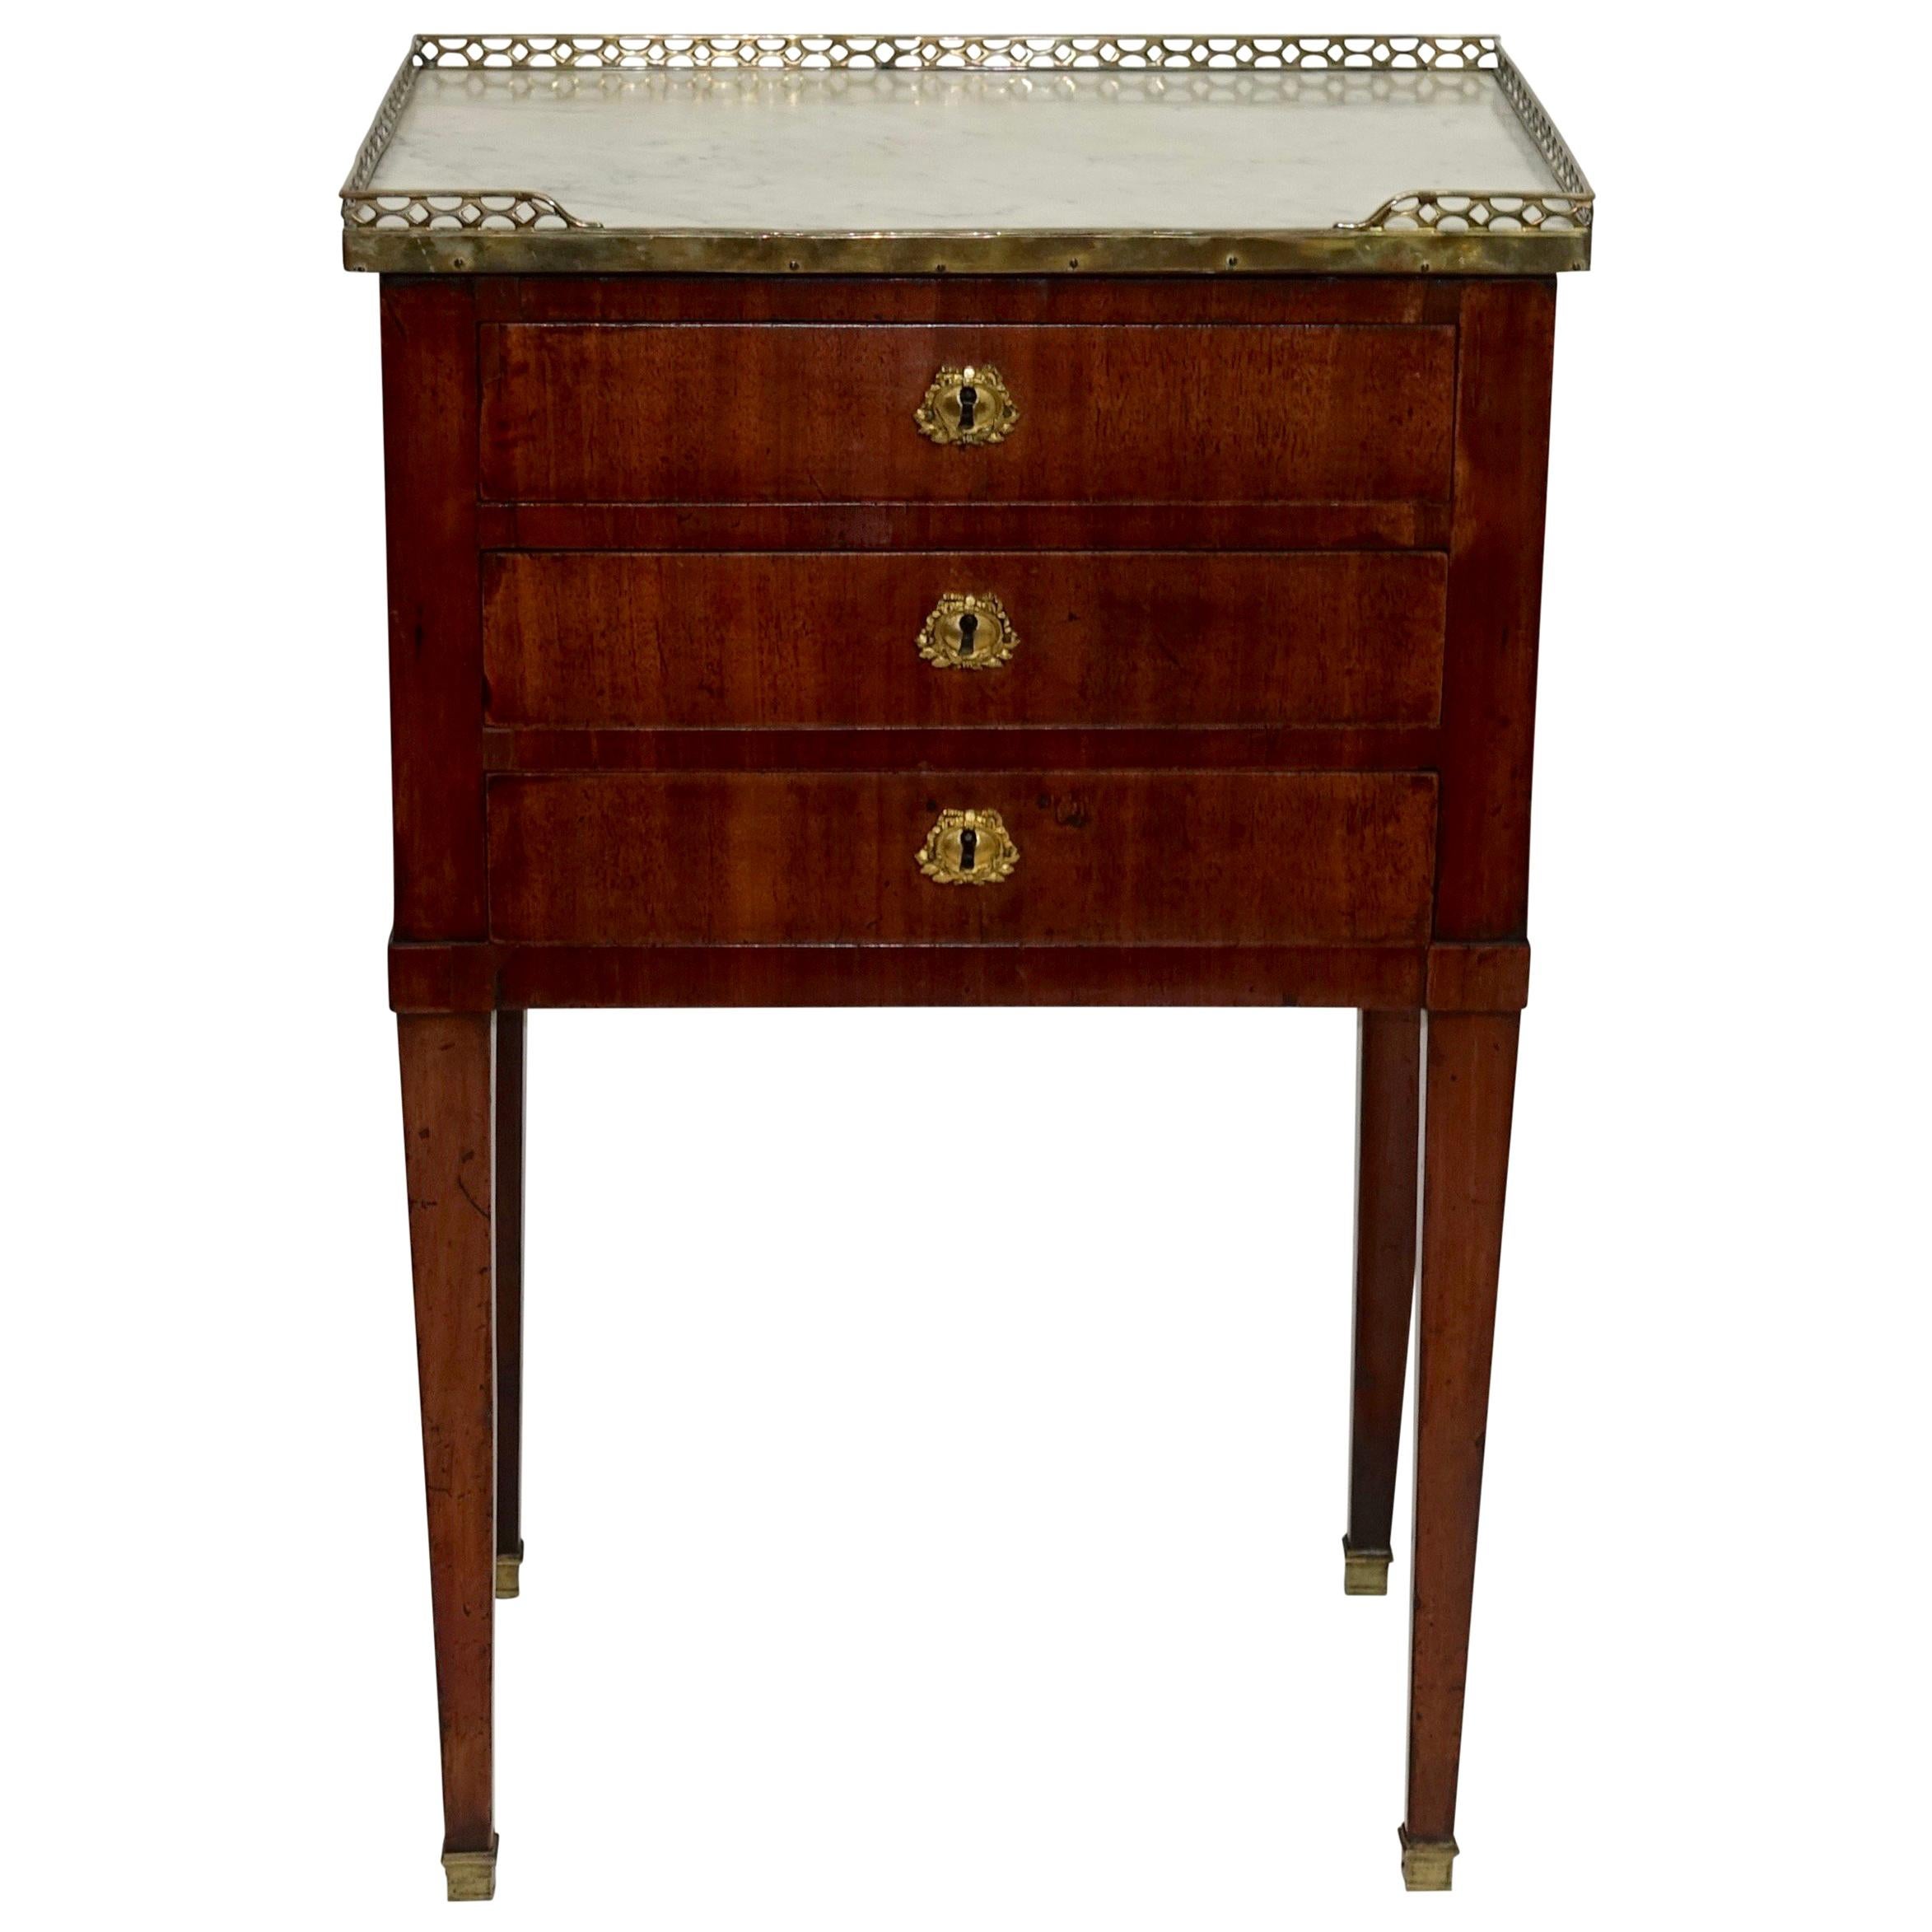 Mahogany Three Drawer Side Table with Marble Top, French 19th Century